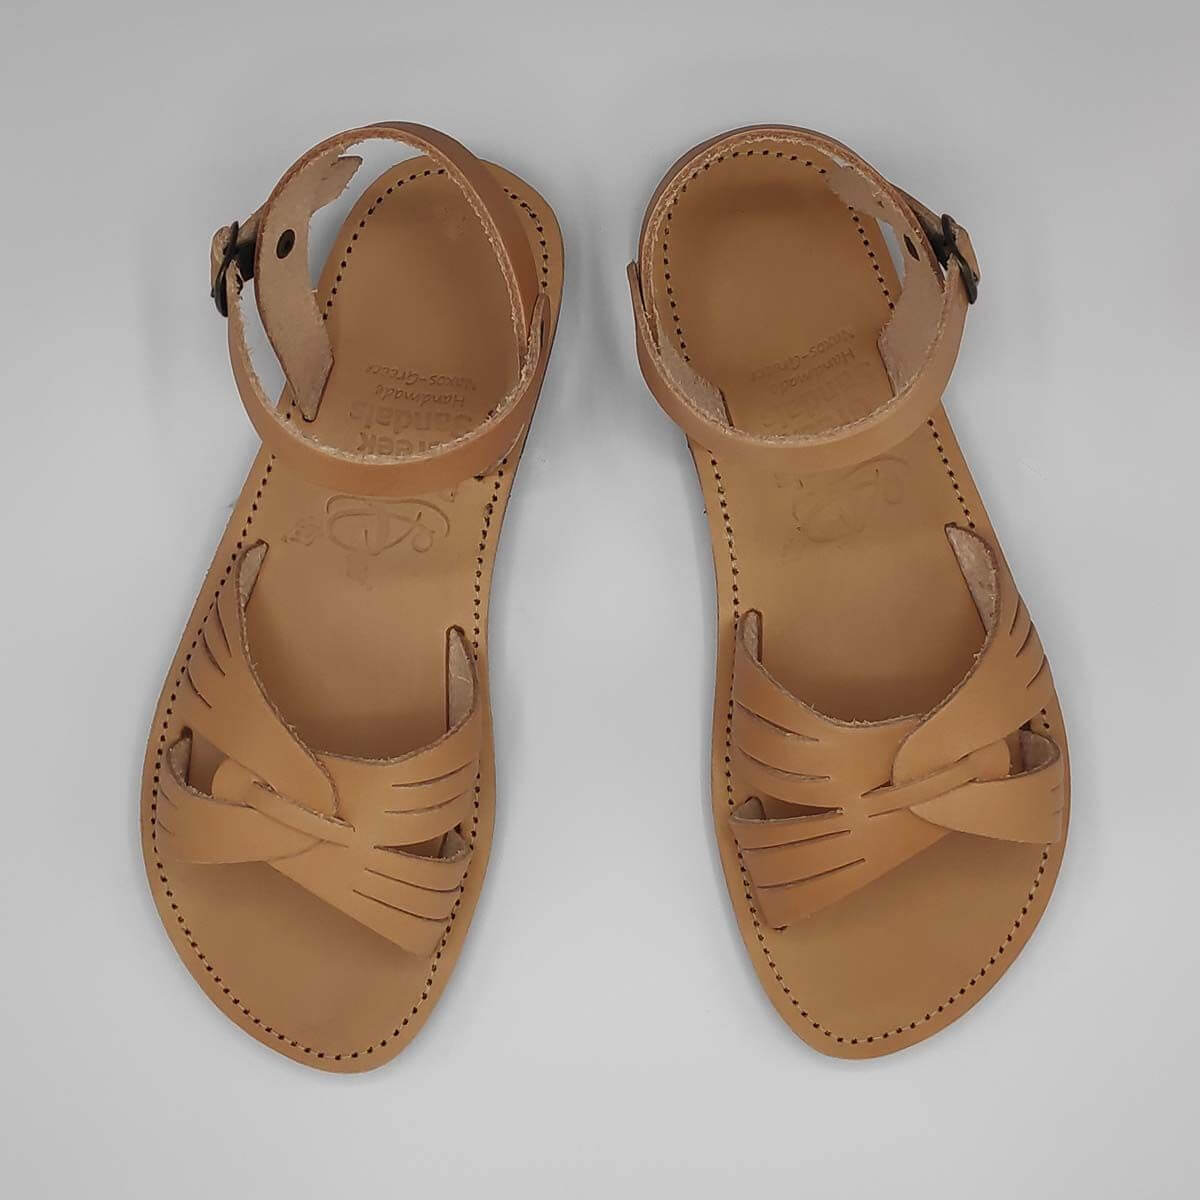 Fiodes leather sandals with side cuts | Pagonis Greek Sandals